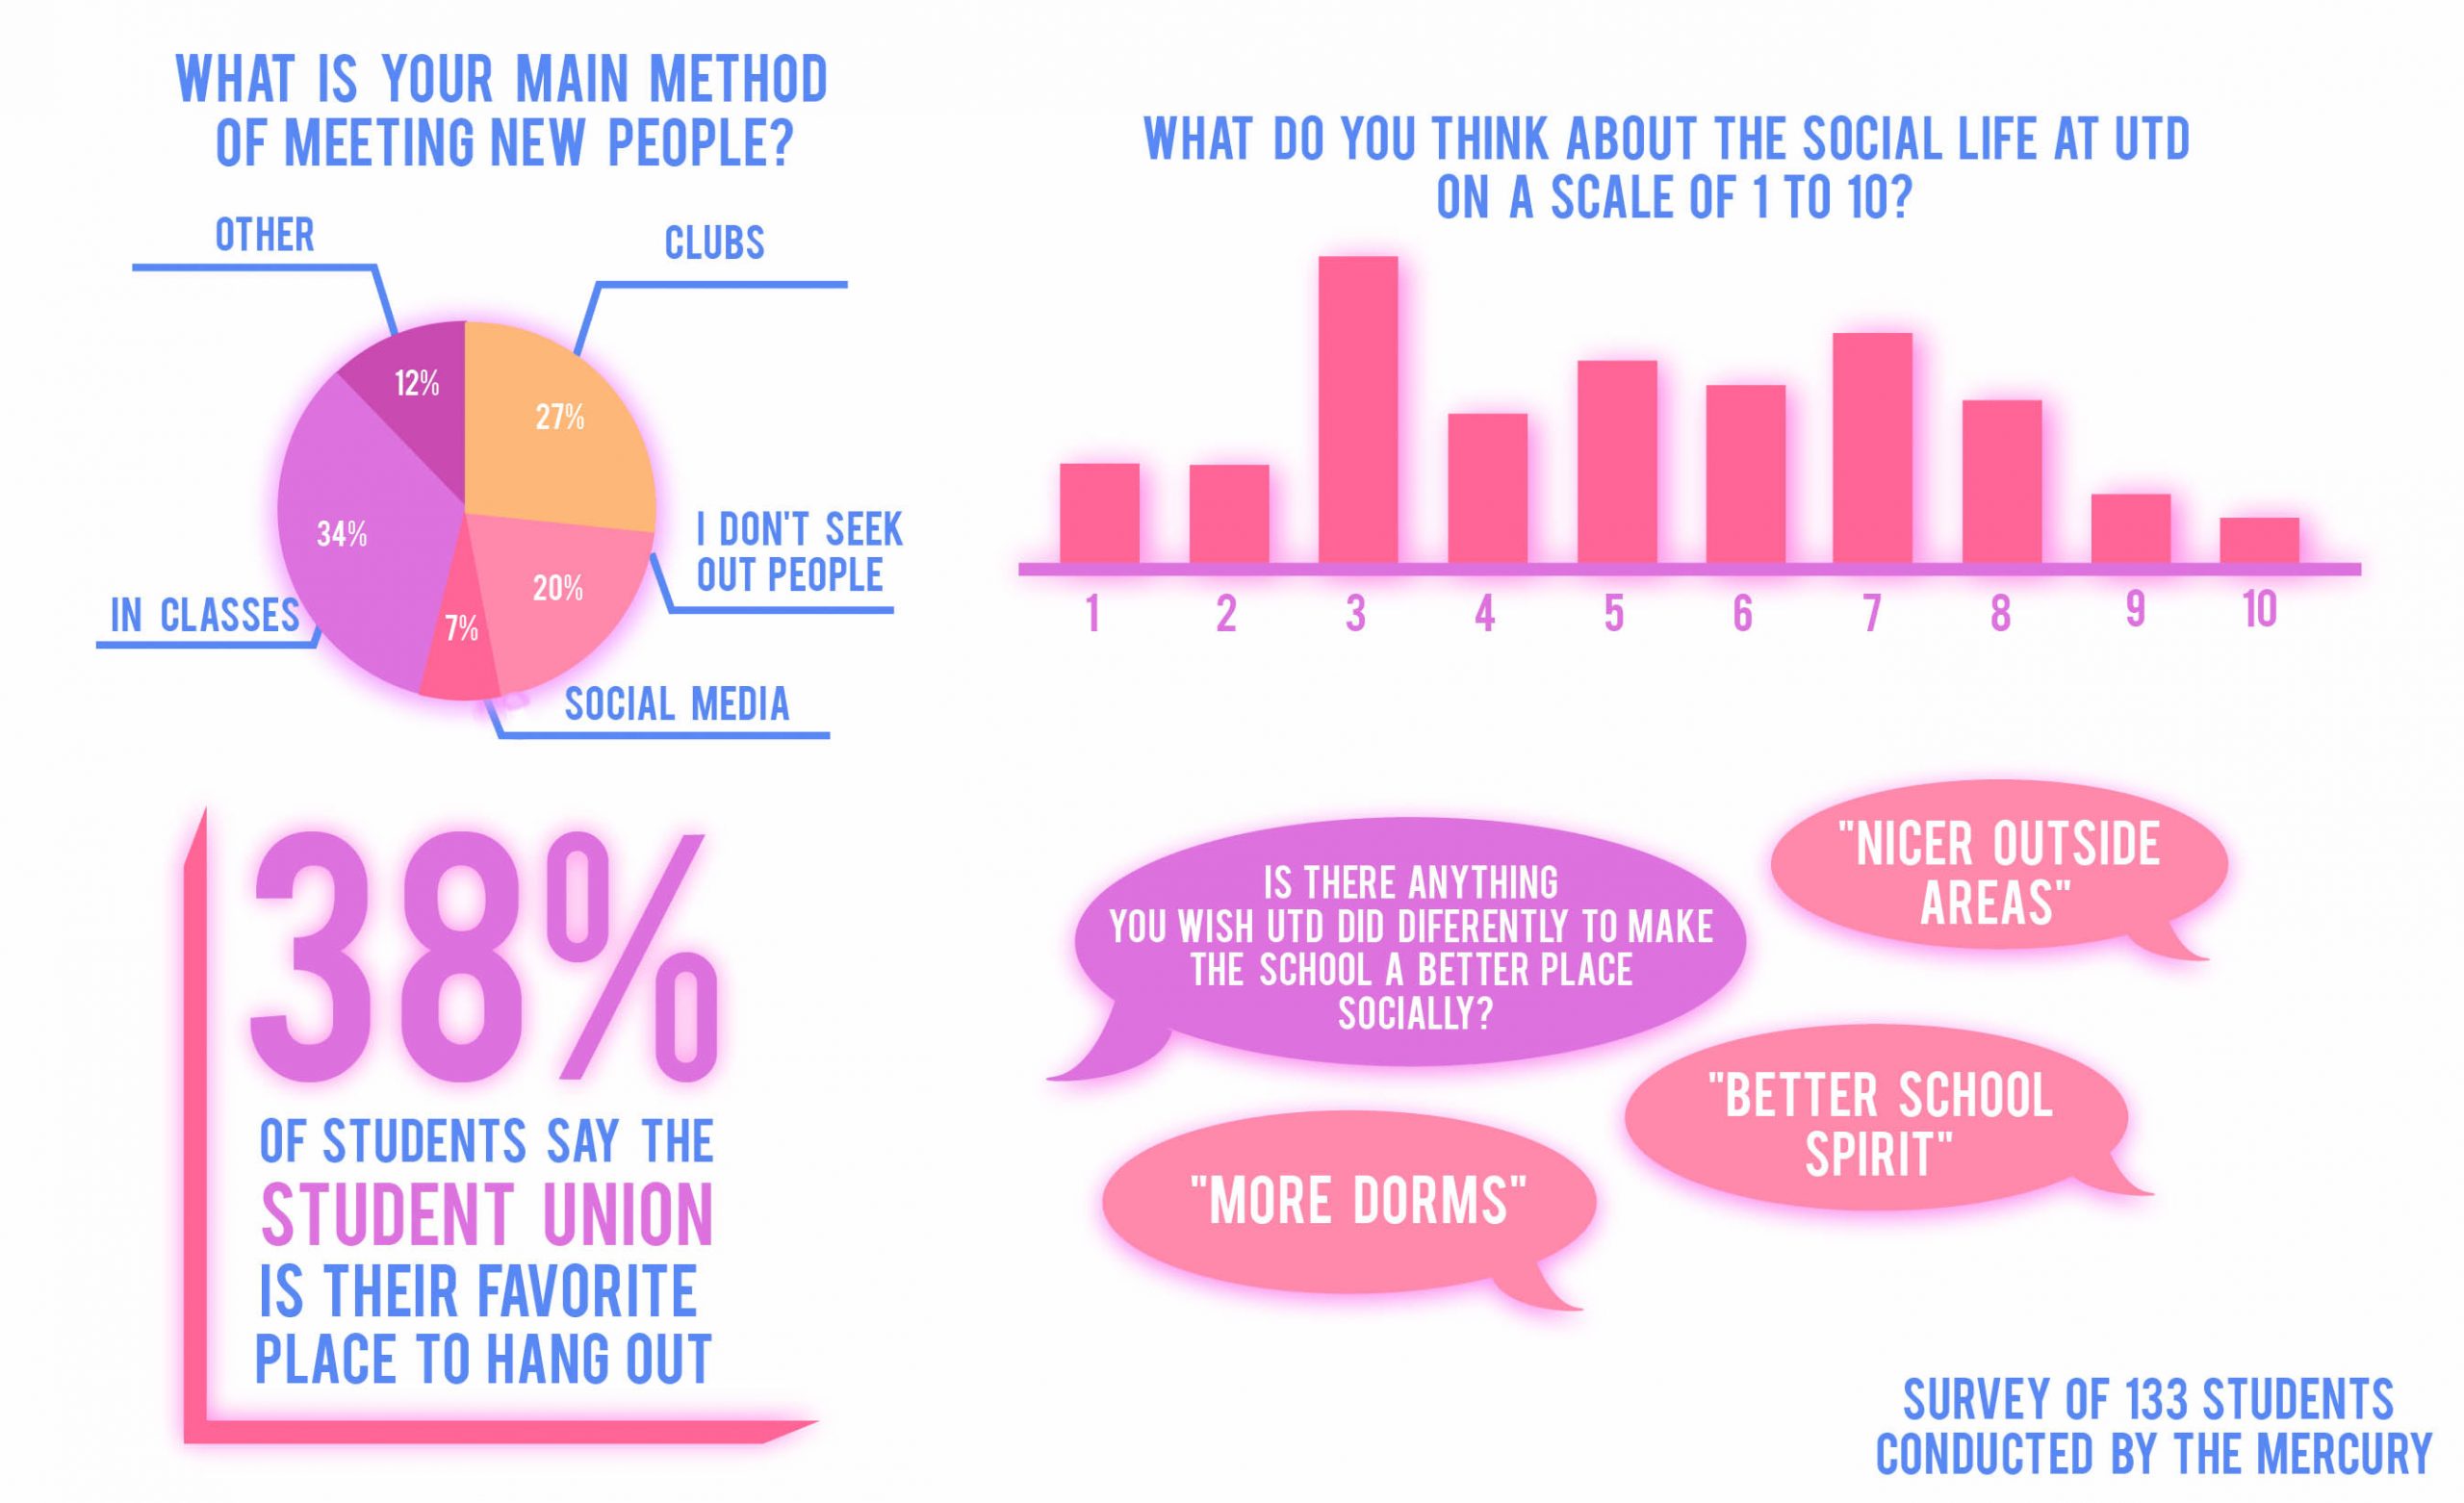 What Do UTD Students Think about Social Life?